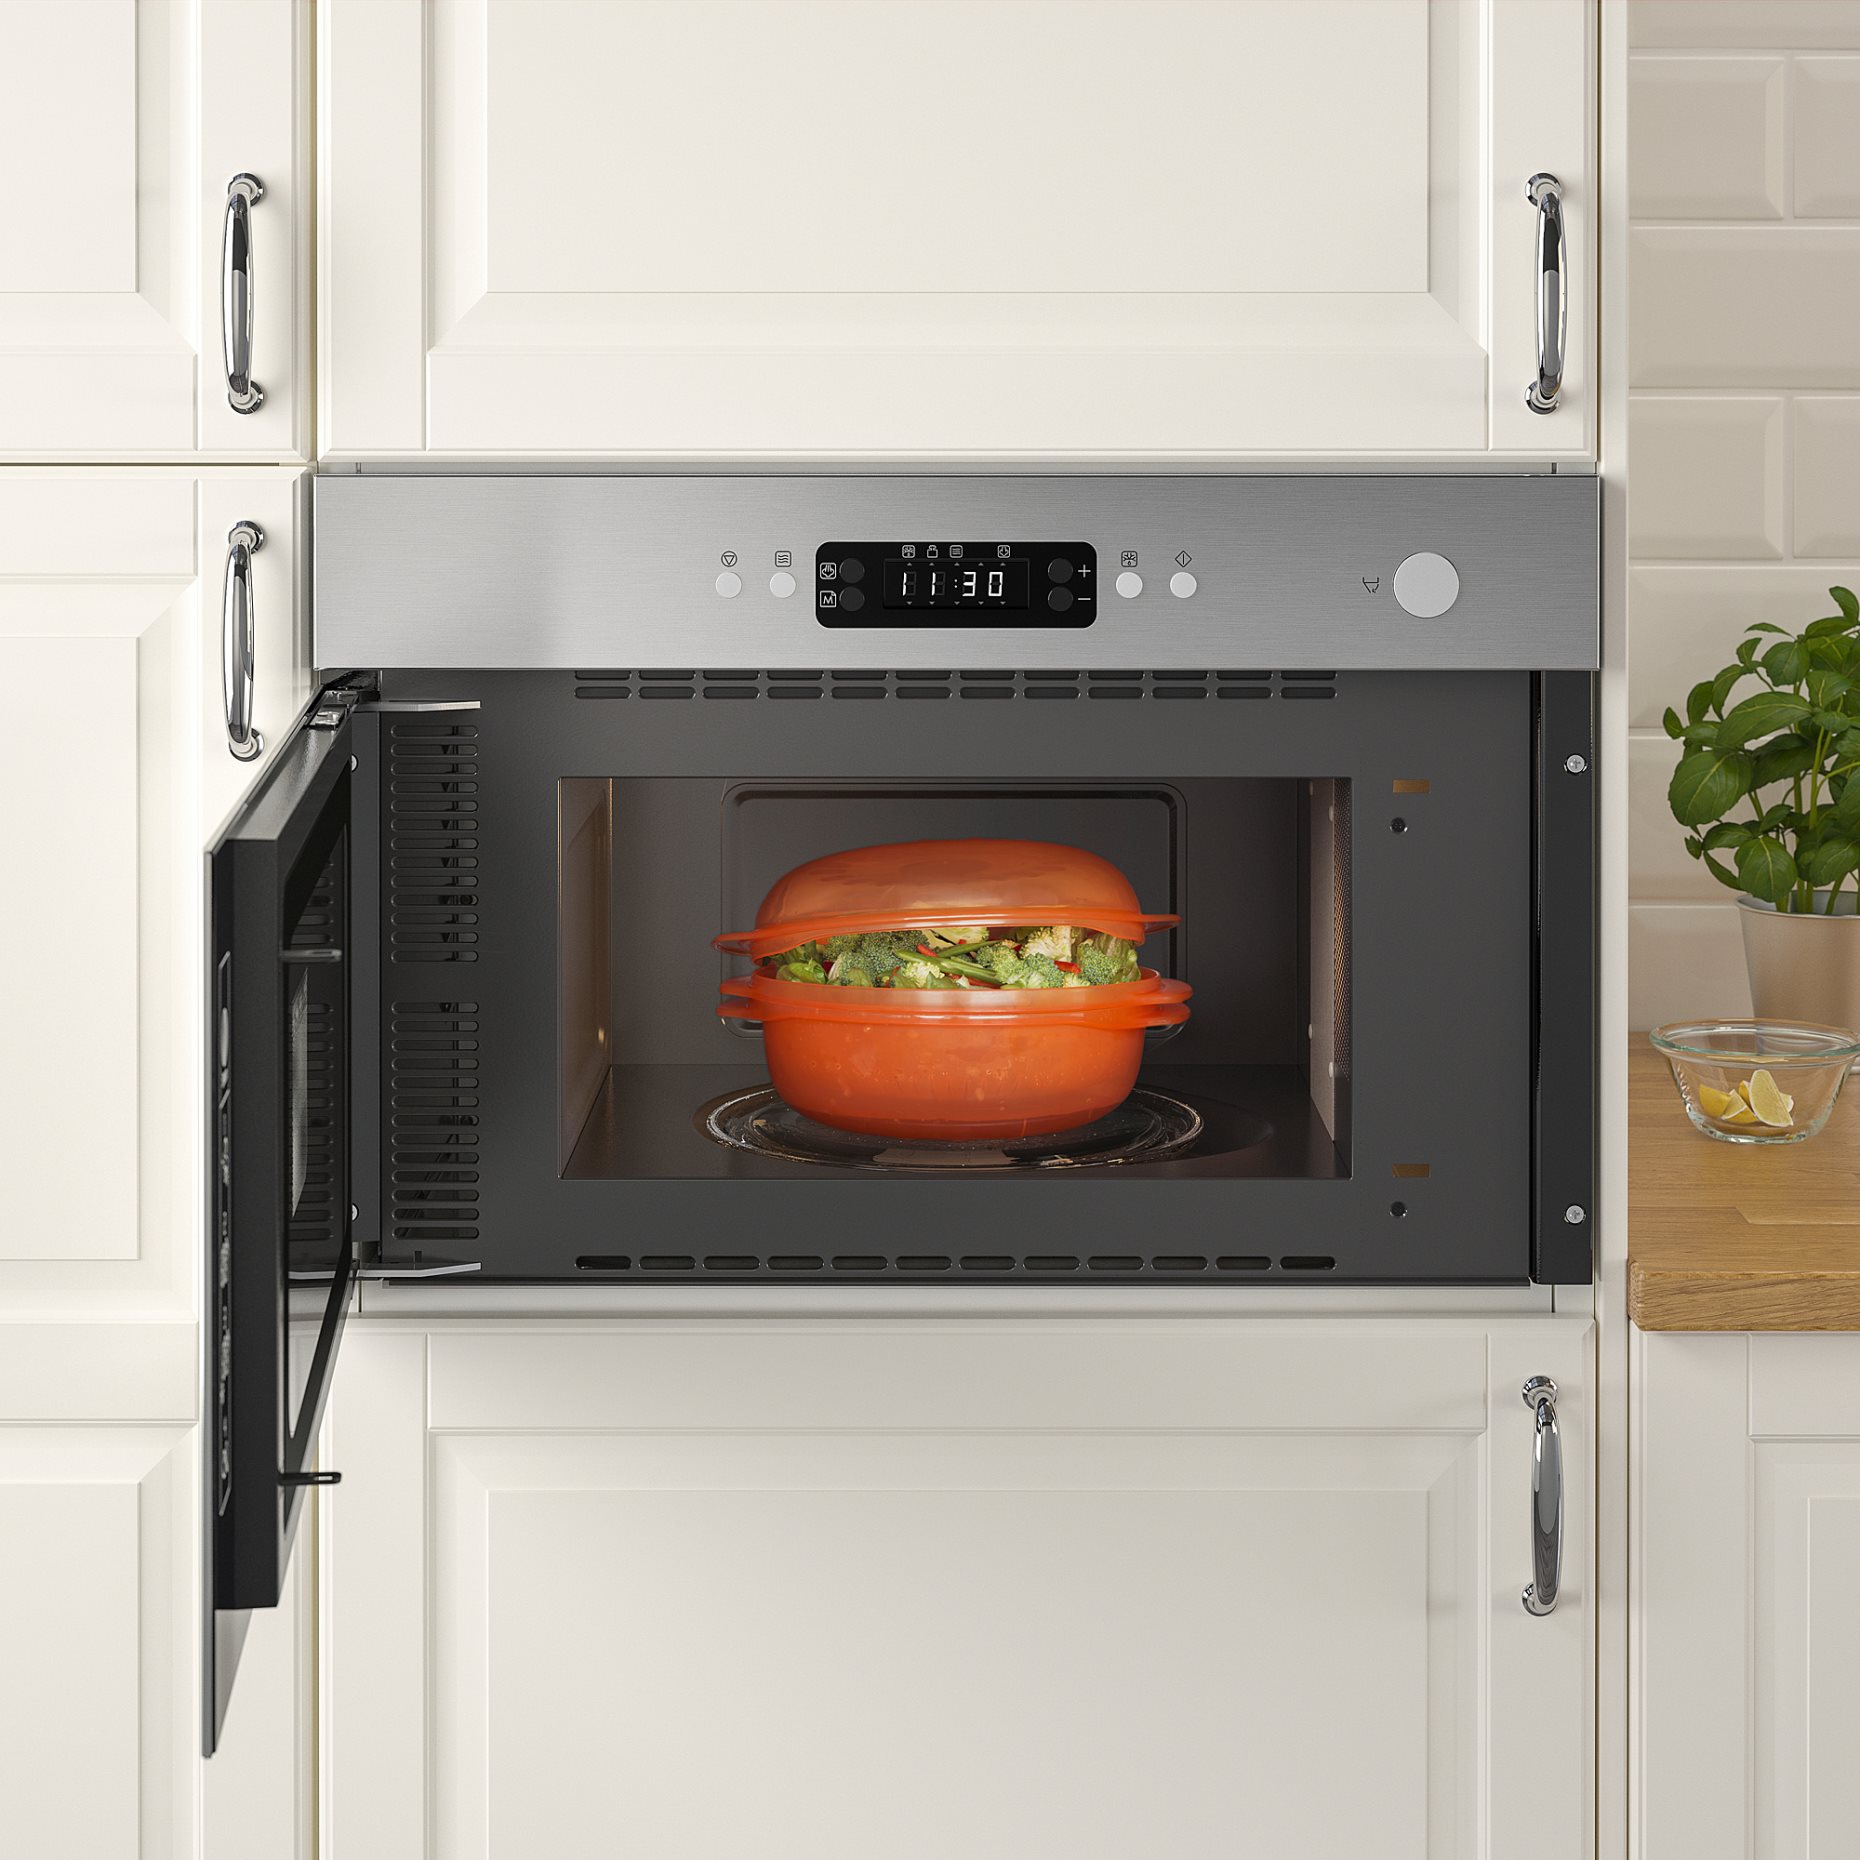 MATTRADITION, microwave oven, 603.687.69